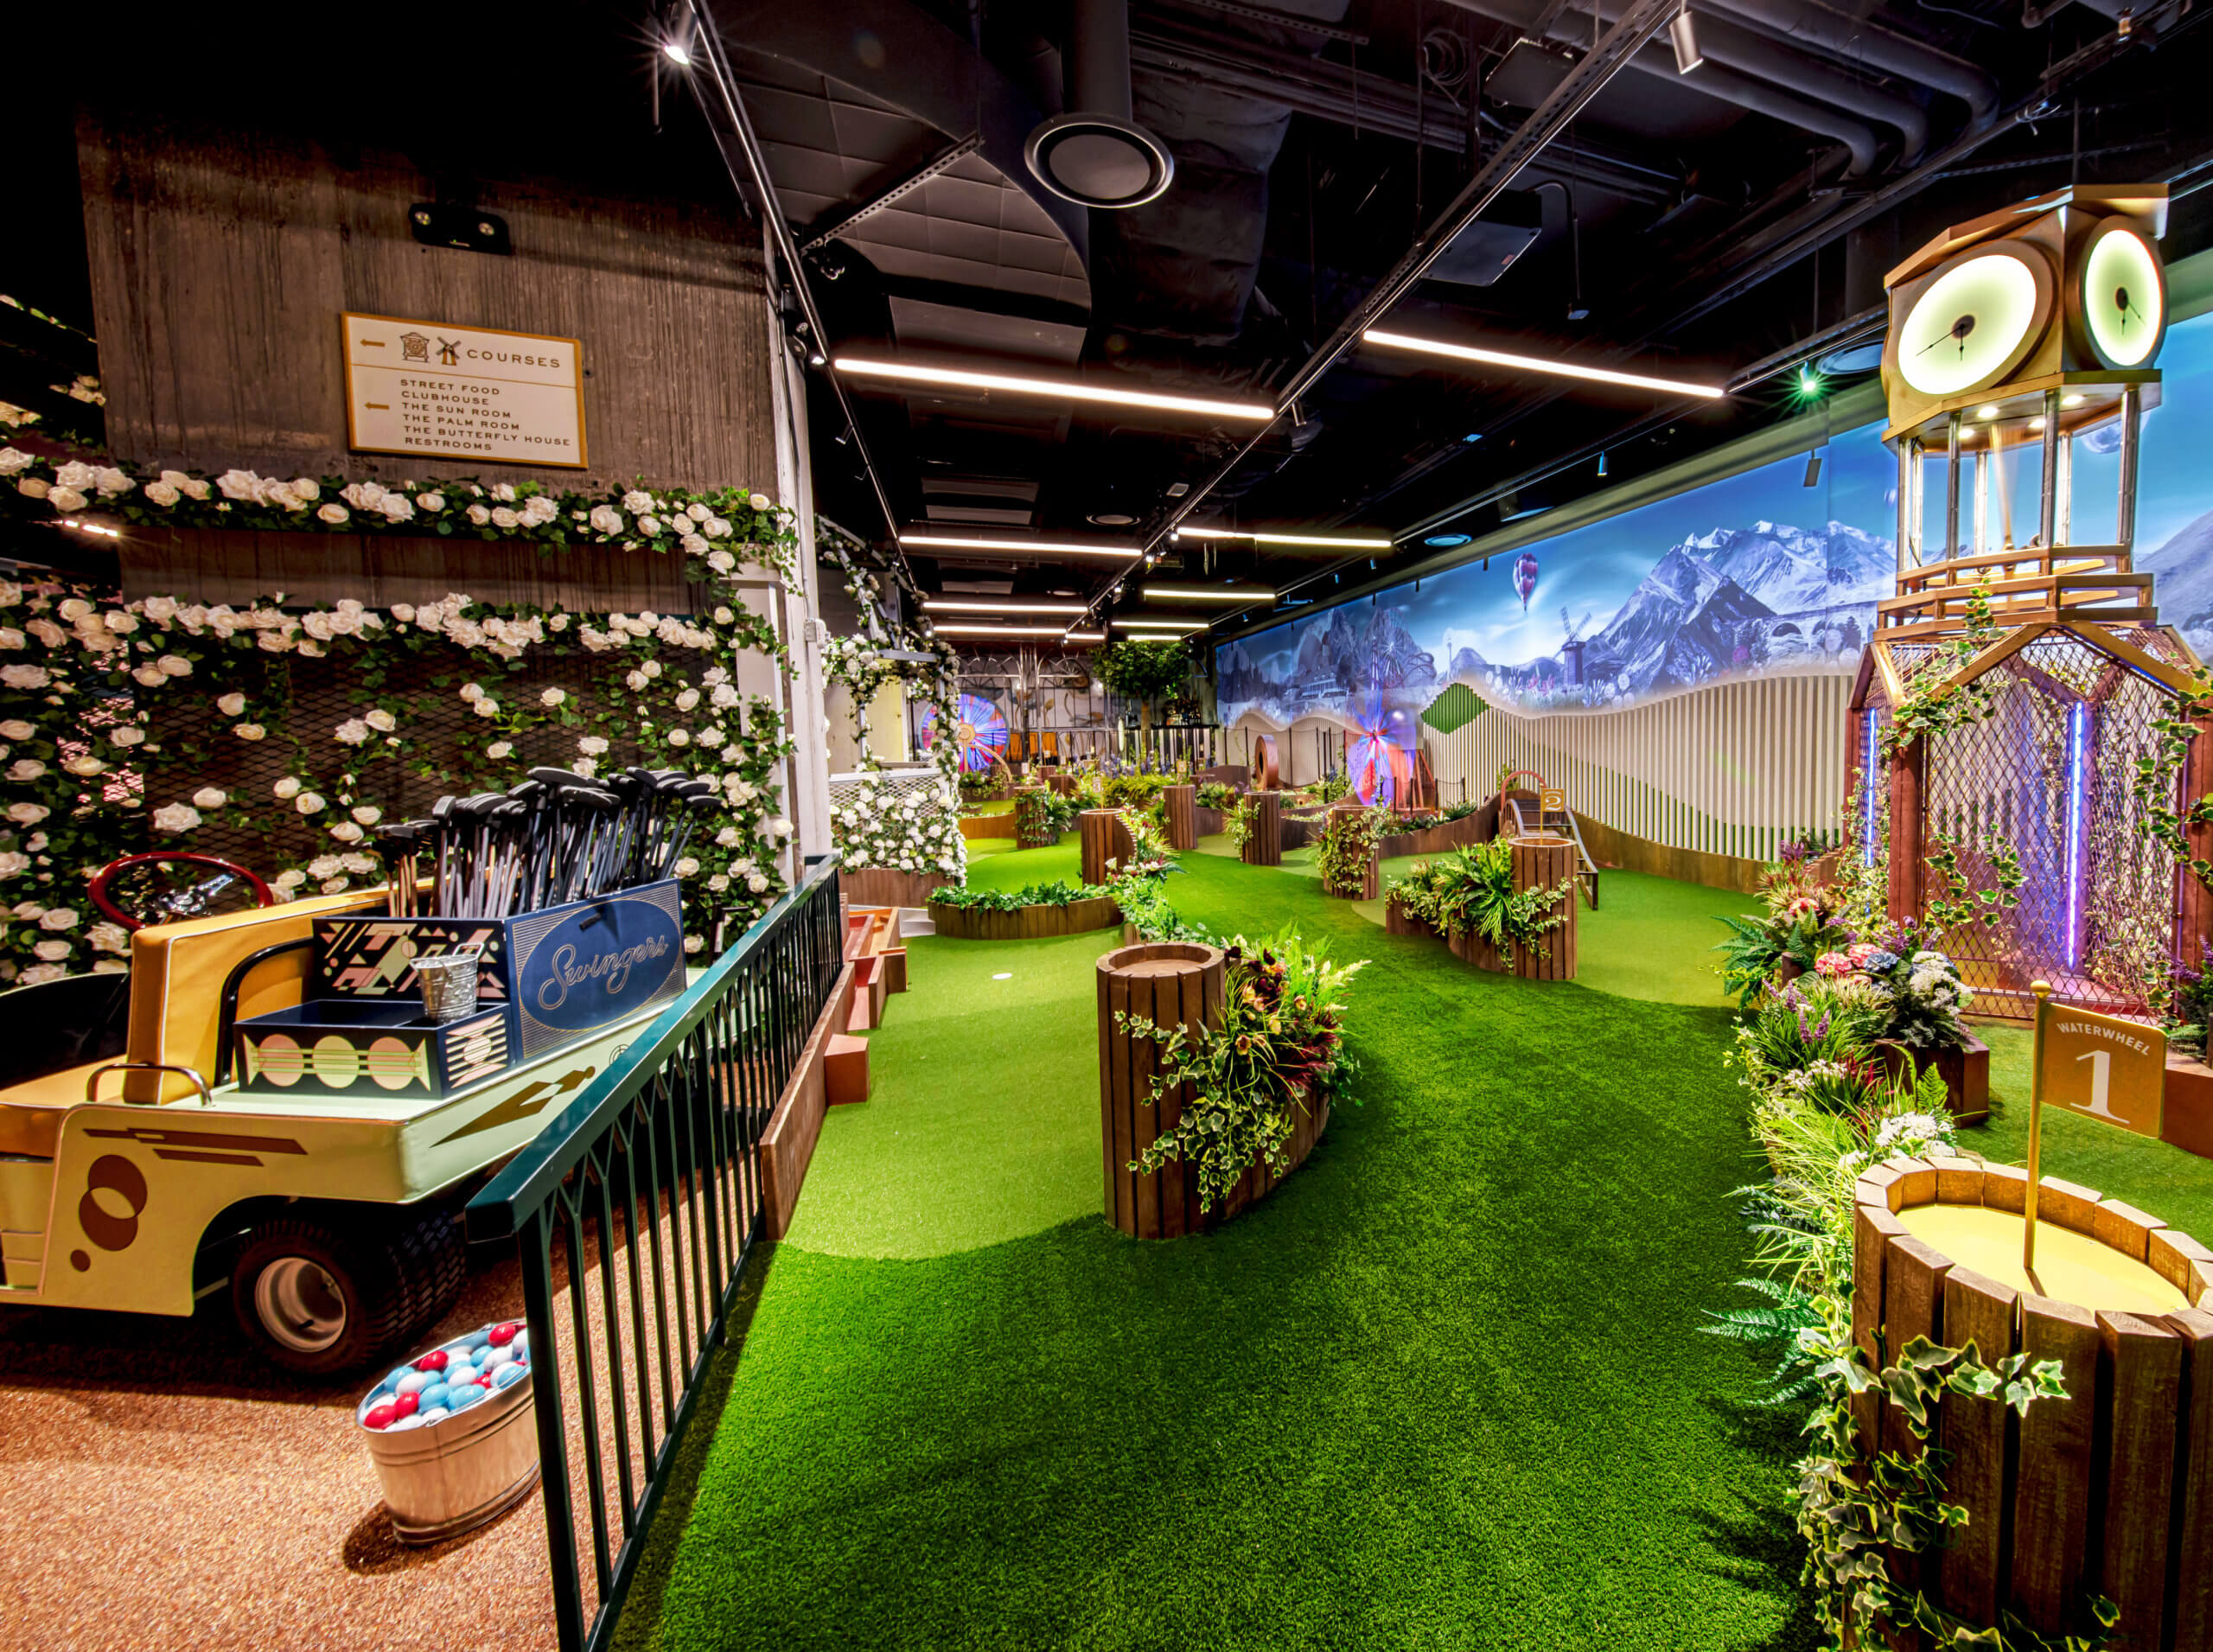 Swingers brings immersive mini golf experience to New York City with local fare and drinks amNewYork